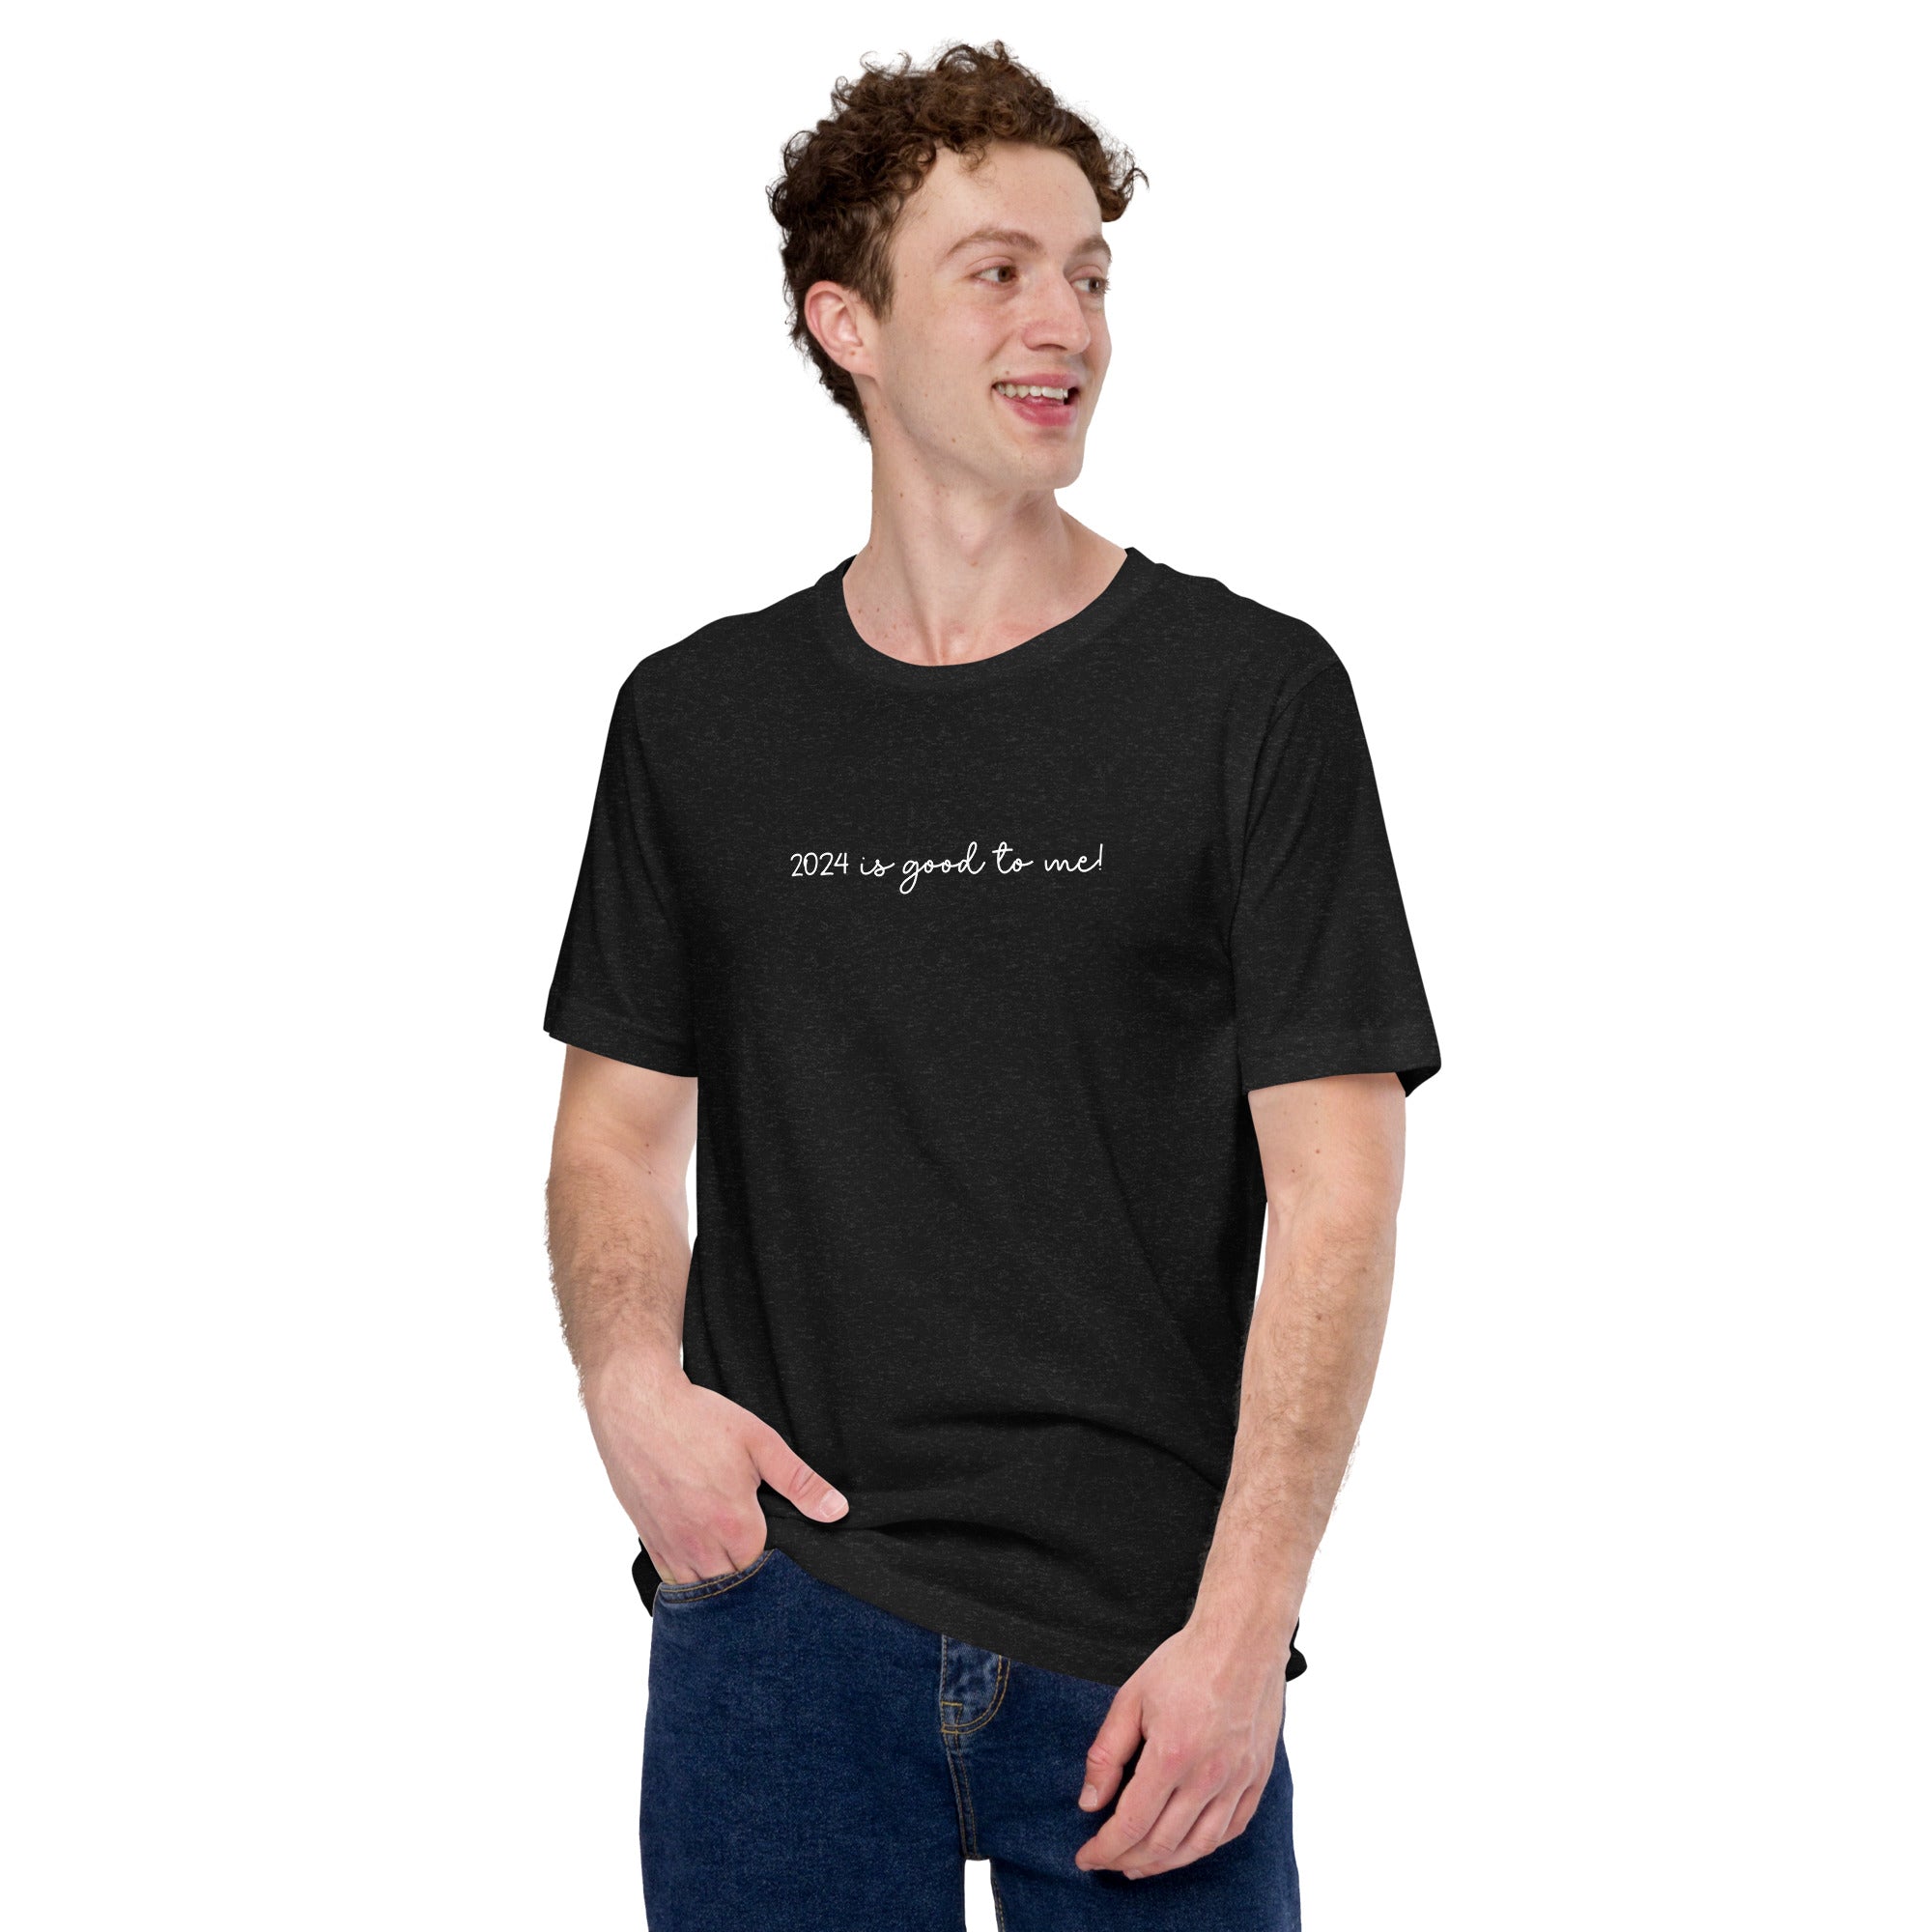 2024 so good to me - Unisex t-shirt | Positive Affirmation Tee